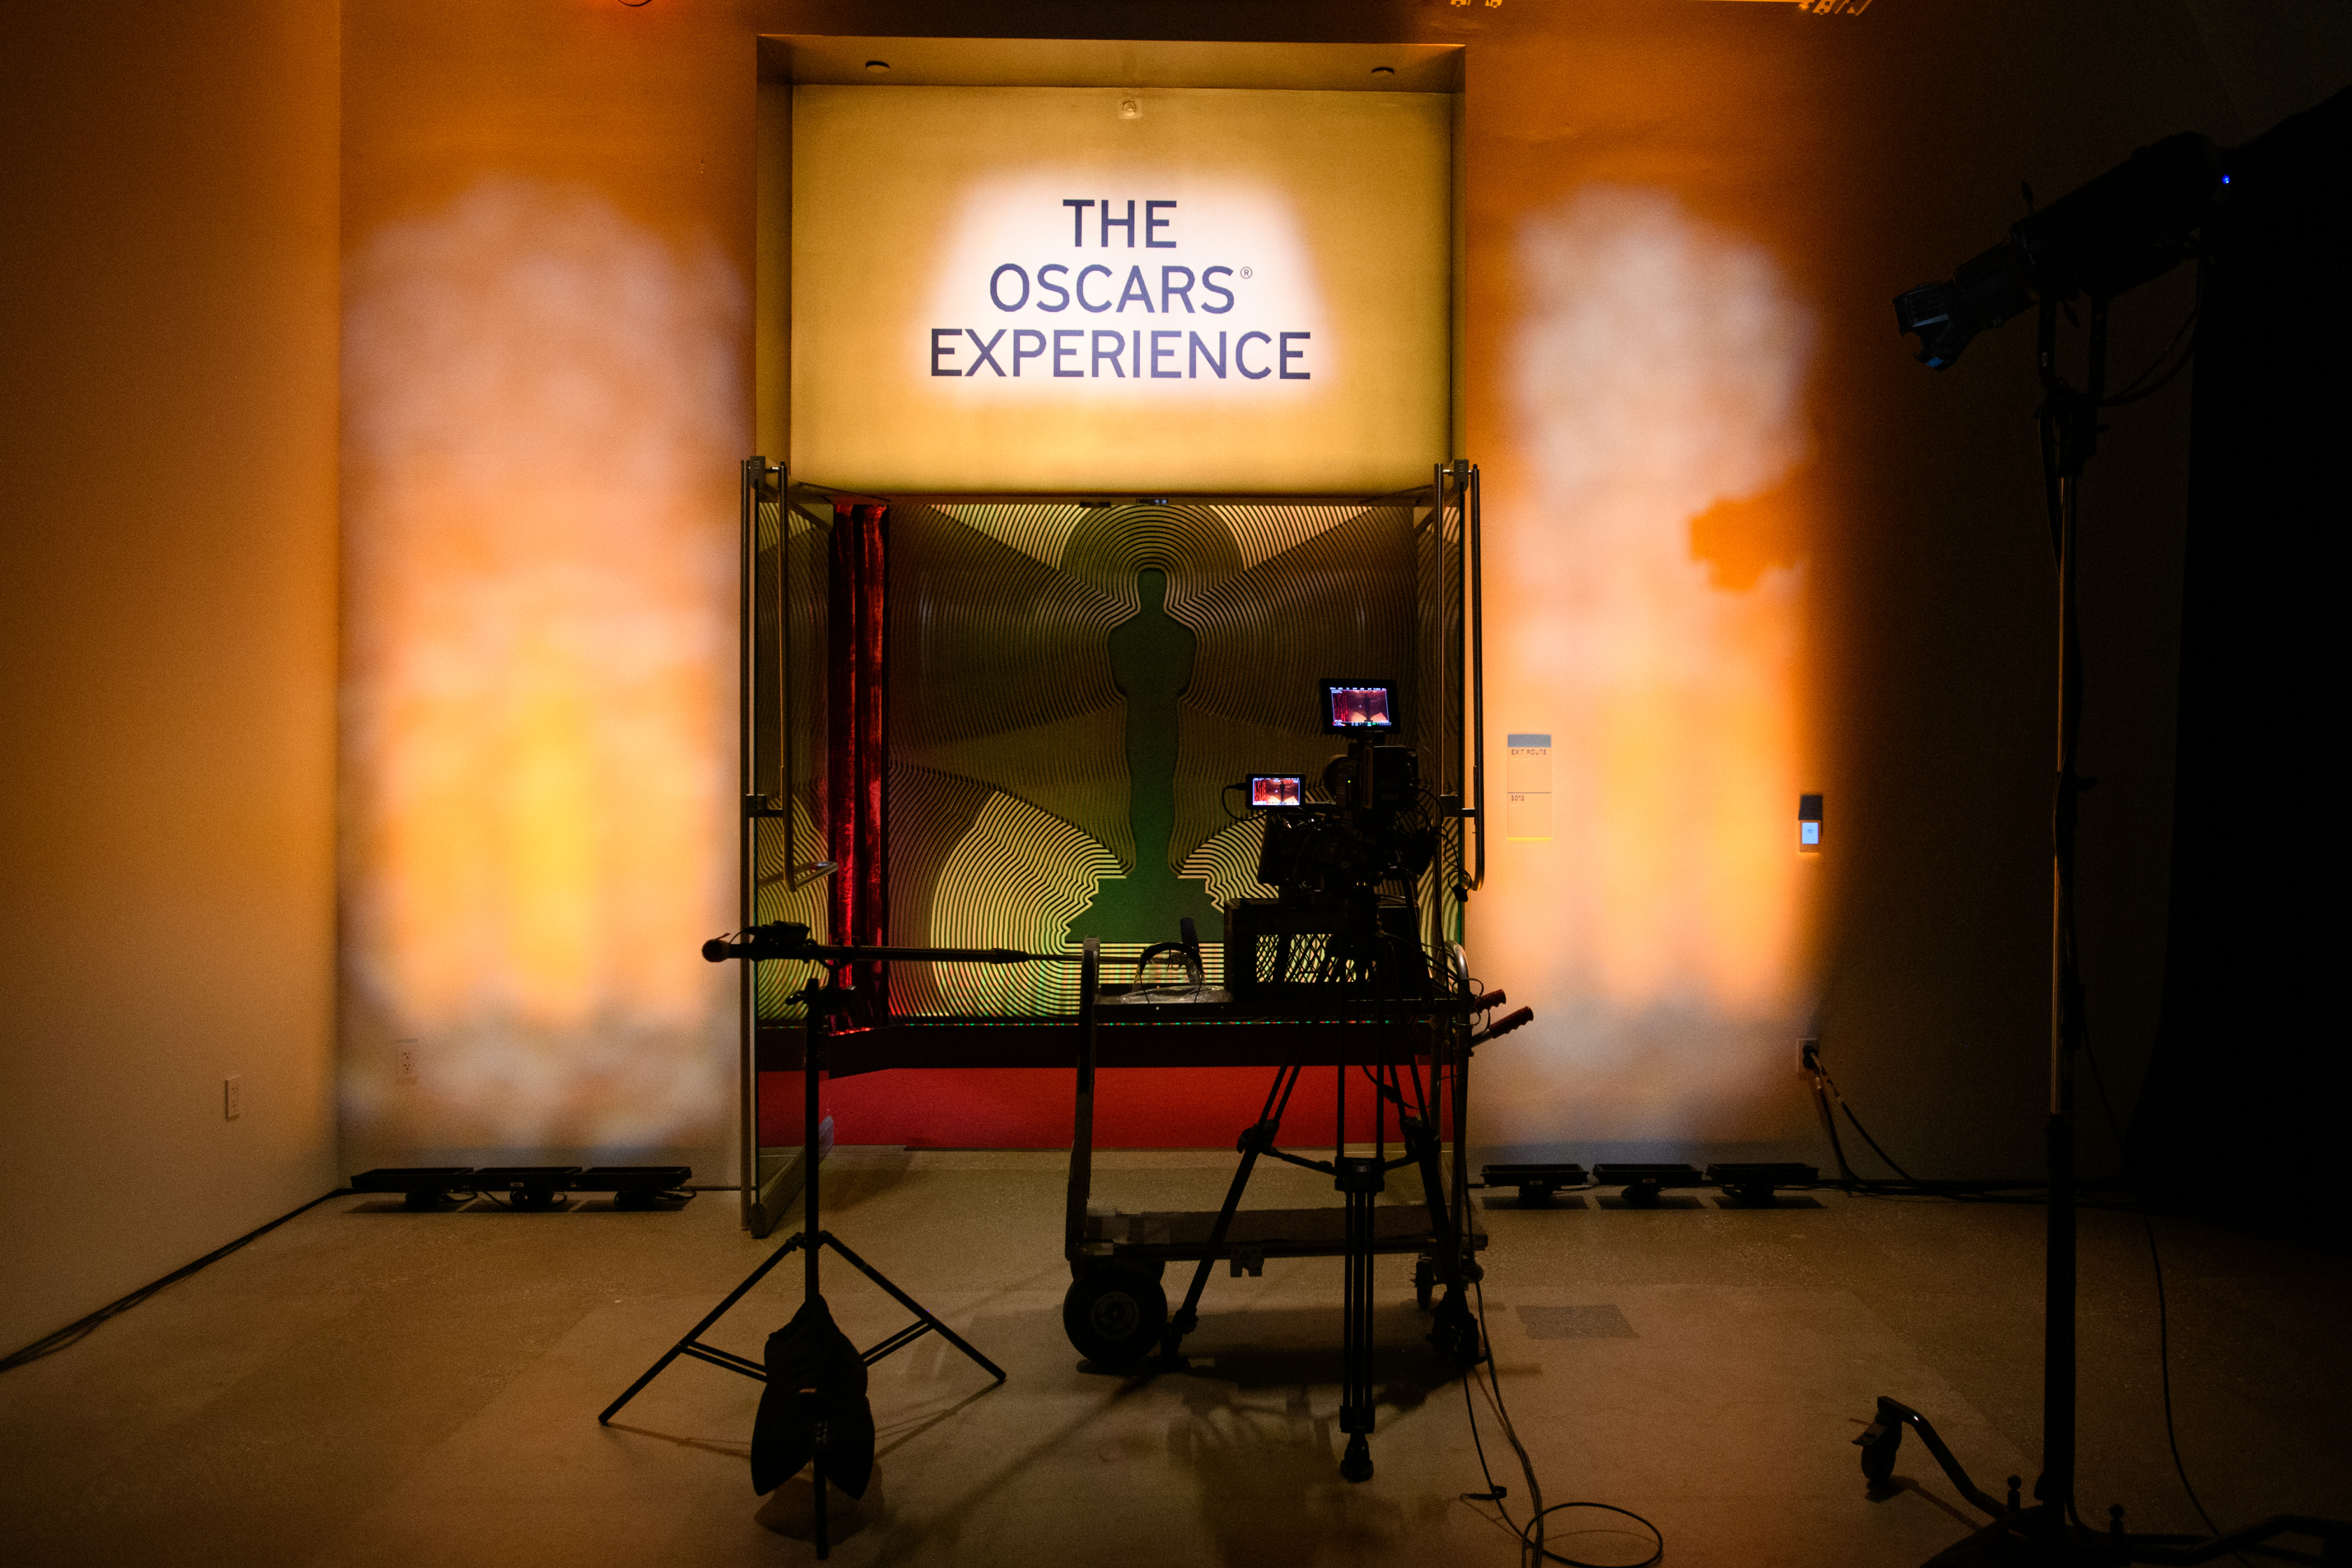 &nbsp;this handout image provided by A.M.P.A.S. the stage is set for the 93rd Academy Awards Nominations Announcement on March 15, 2021.